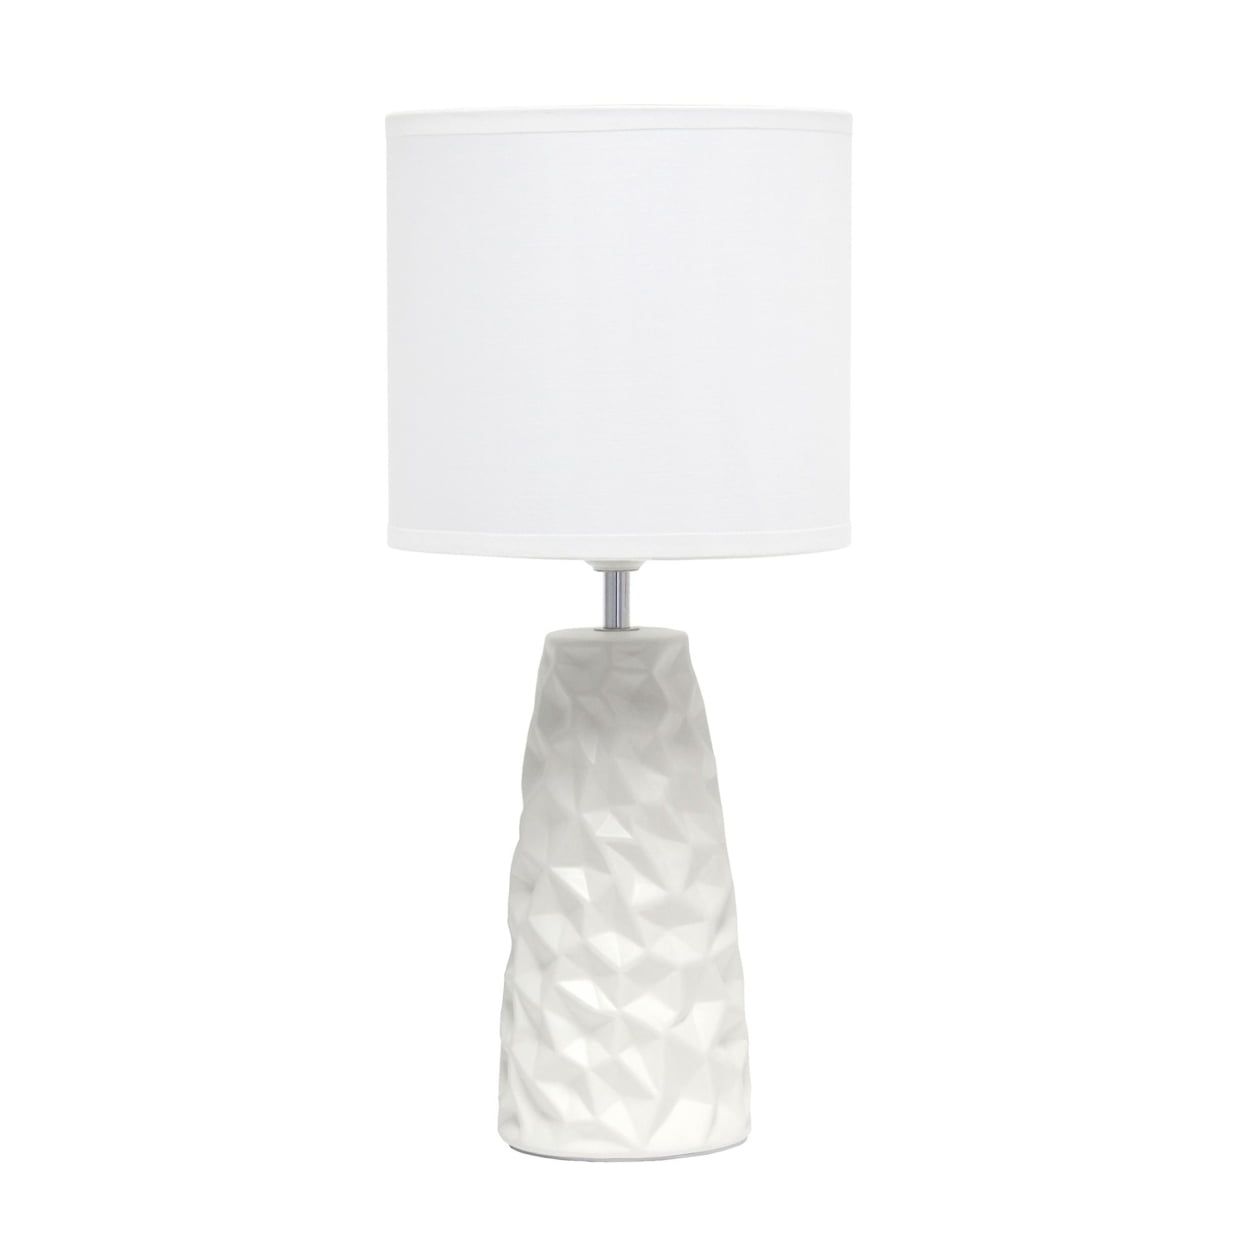 Simple Designs Sculpted Ceramic Table Lamp, Off White